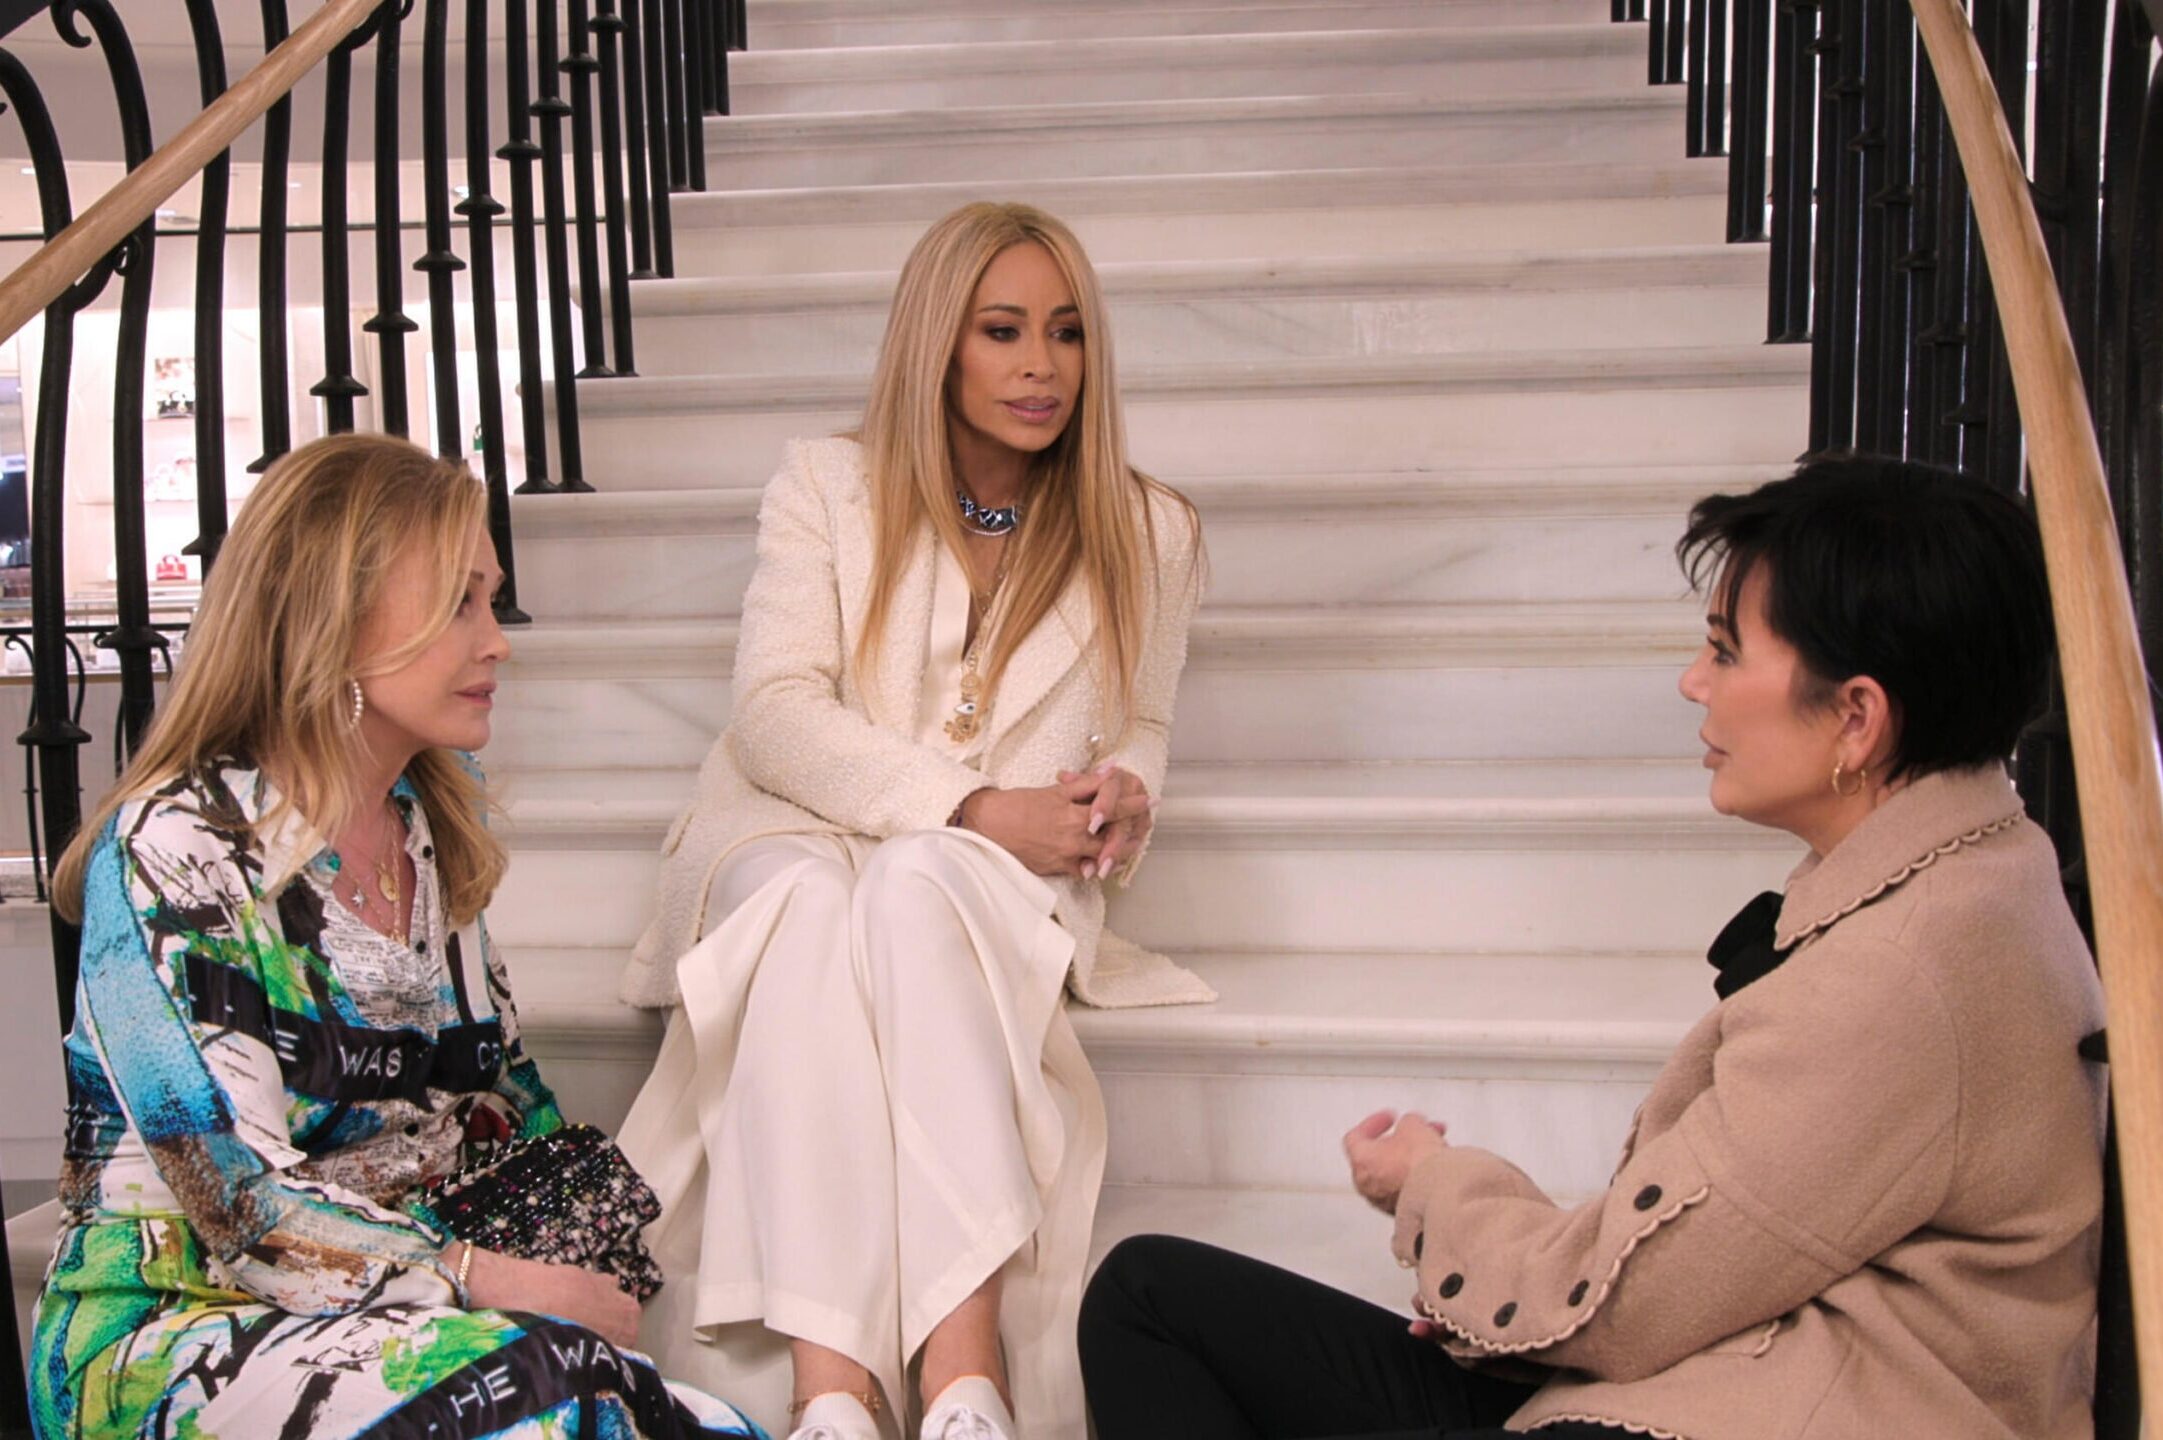 Still from THE KARDASHIANS Season 5 Episode 8 of KATHY HILTON, FAYE RESNICK, and KRIS JENNER pictured from left to righ.